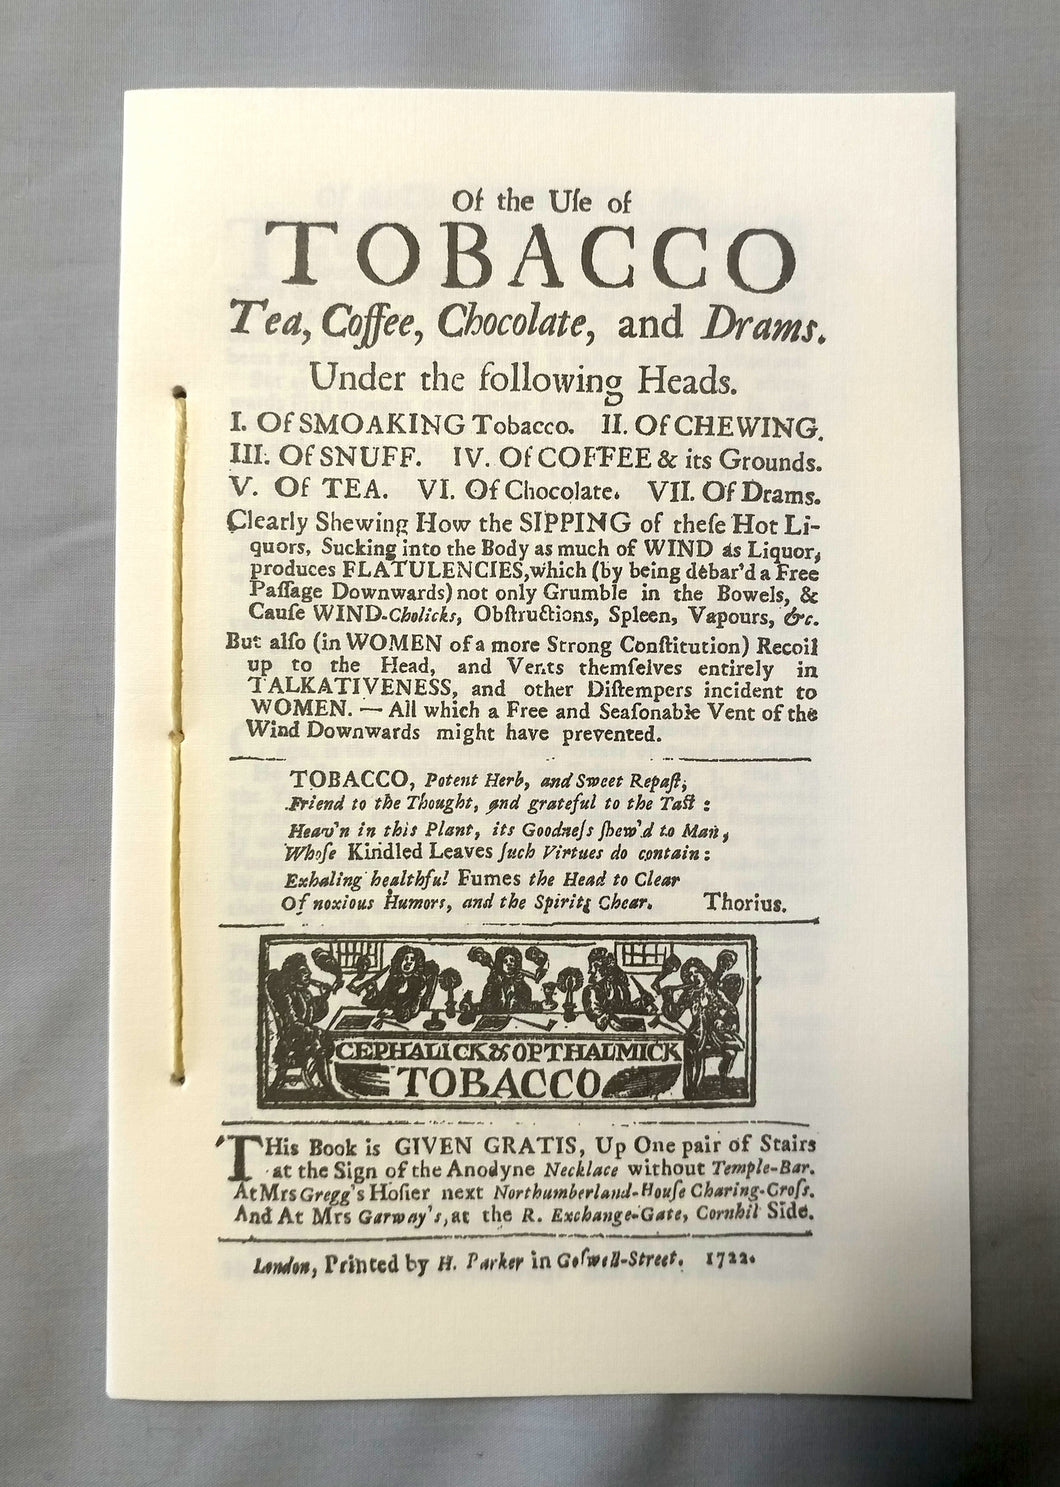 Of the Use of Tobacco, Coffee, Chocolate, and Drams